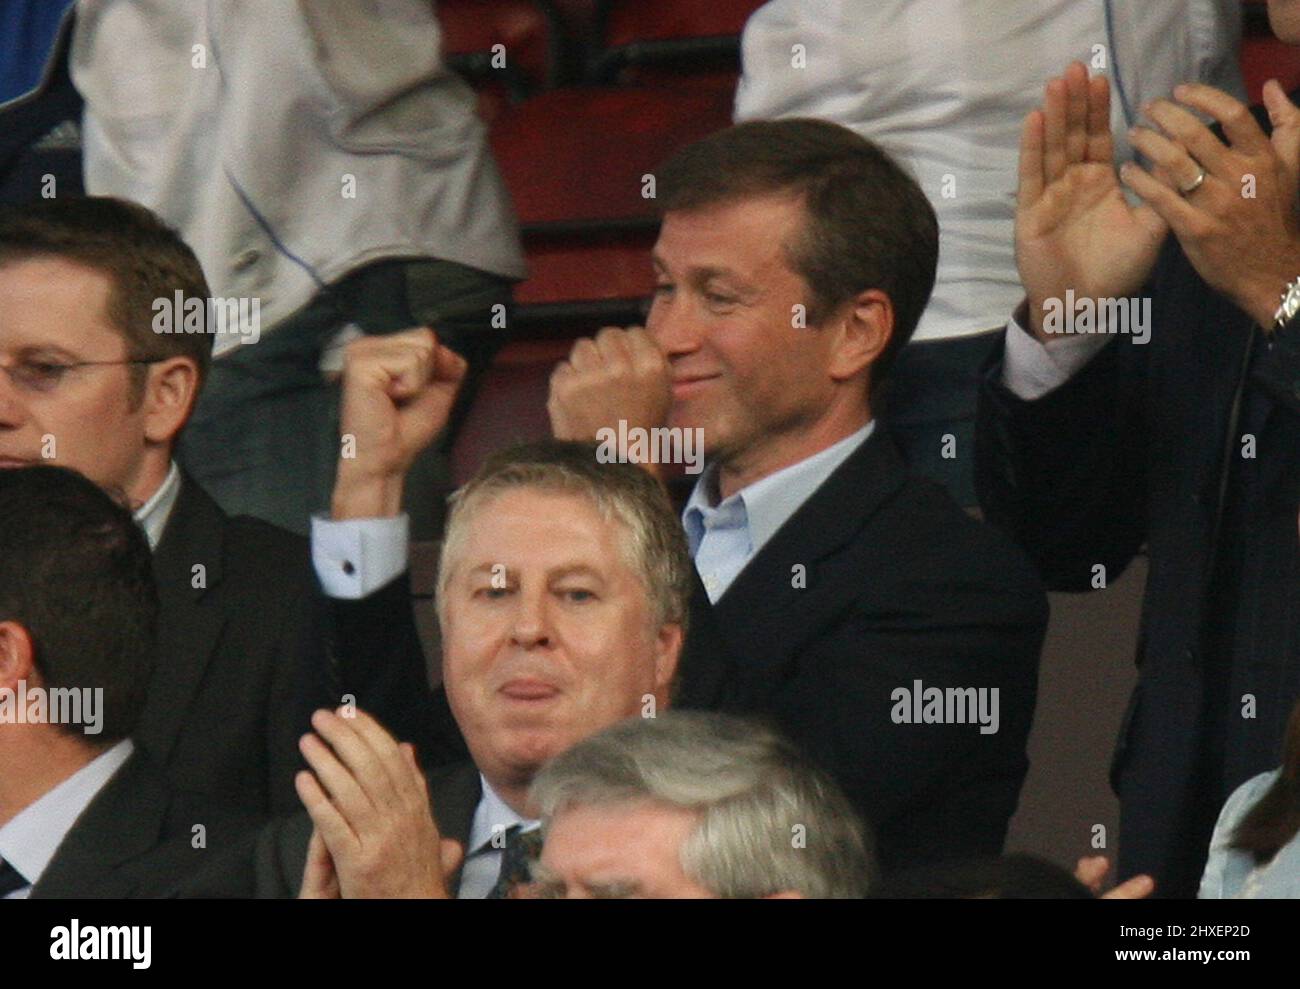 **FILE PIC**  Chelsea owner Roman Abramovich has had his assets frozen as sanctions have been placed on the Russian billionaire. ** Pic: Paul Marriott . . Blackburn Rovers v Chelsea - FA Cup Semi-Final . . 15.04.07 Chelsea owner Roman Abramovich celebrates. Stock Photo